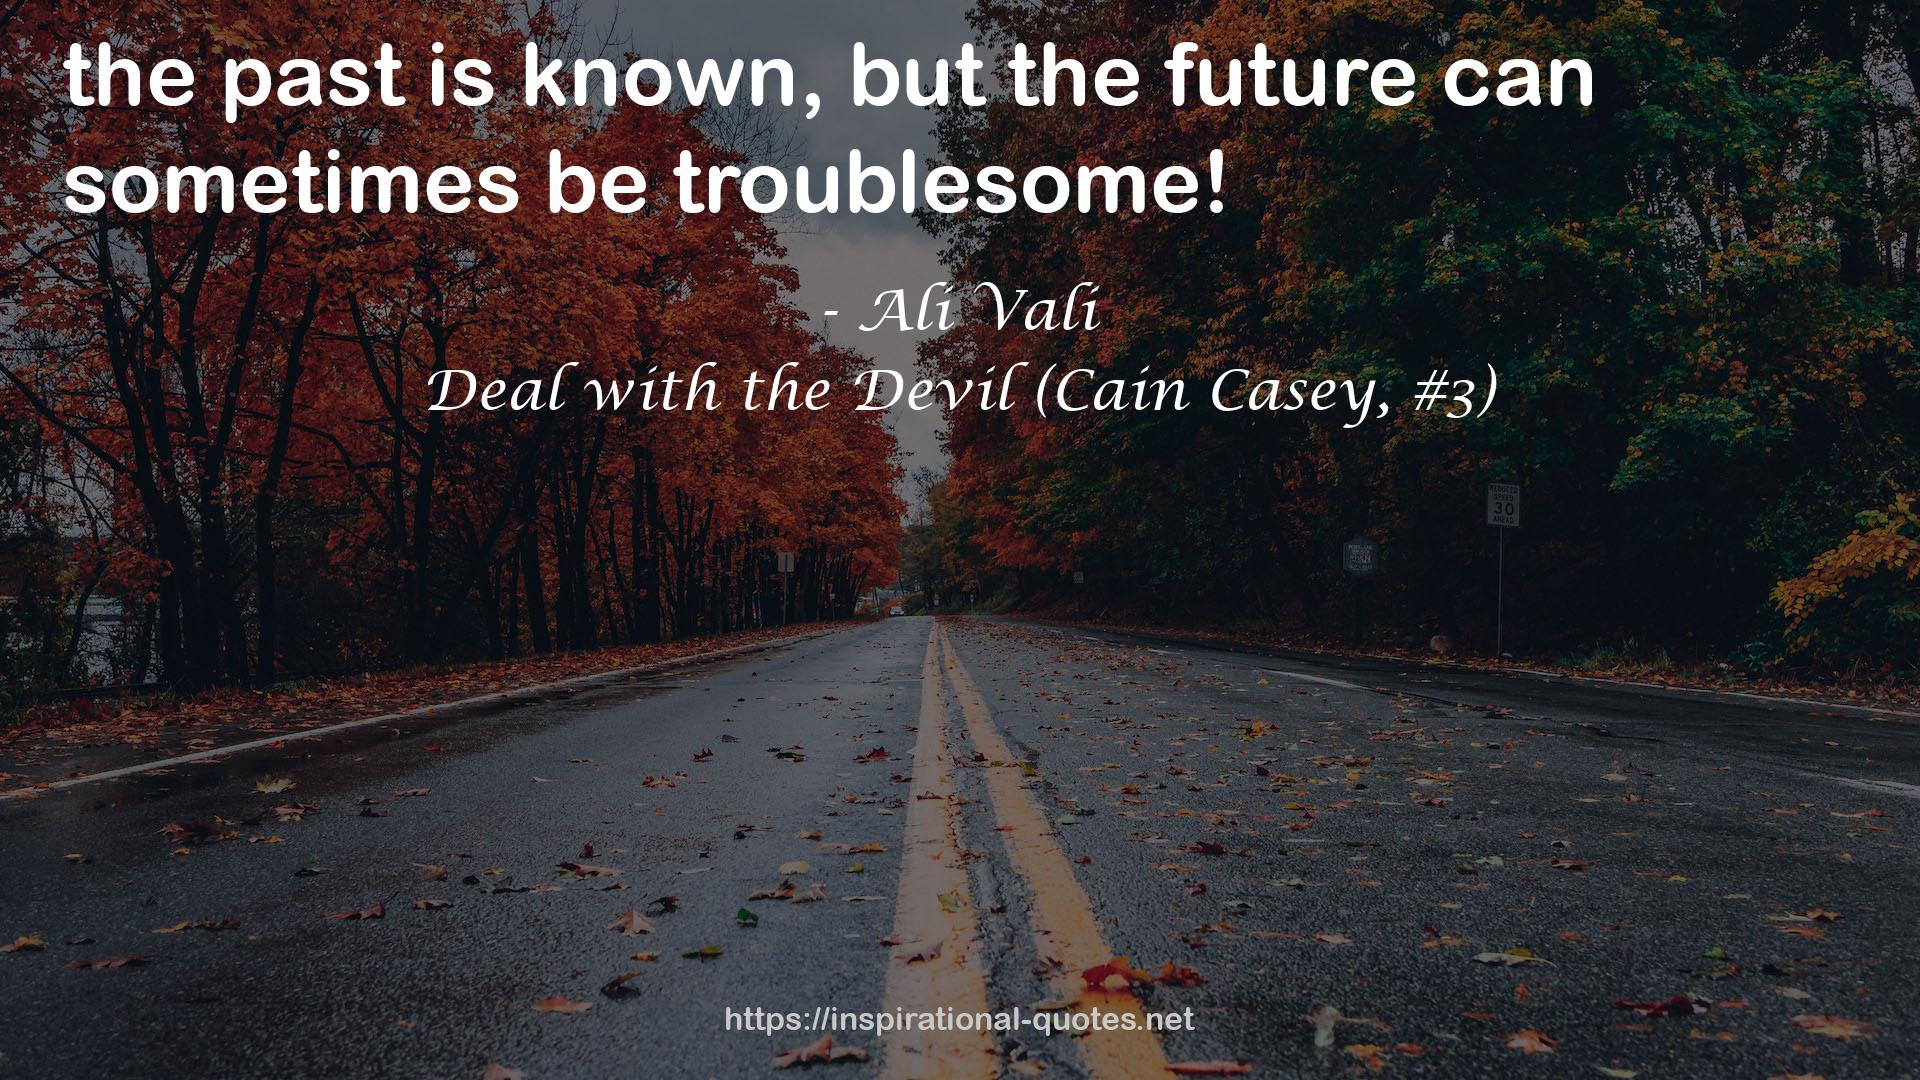 Deal with the Devil (Cain Casey, #3) QUOTES